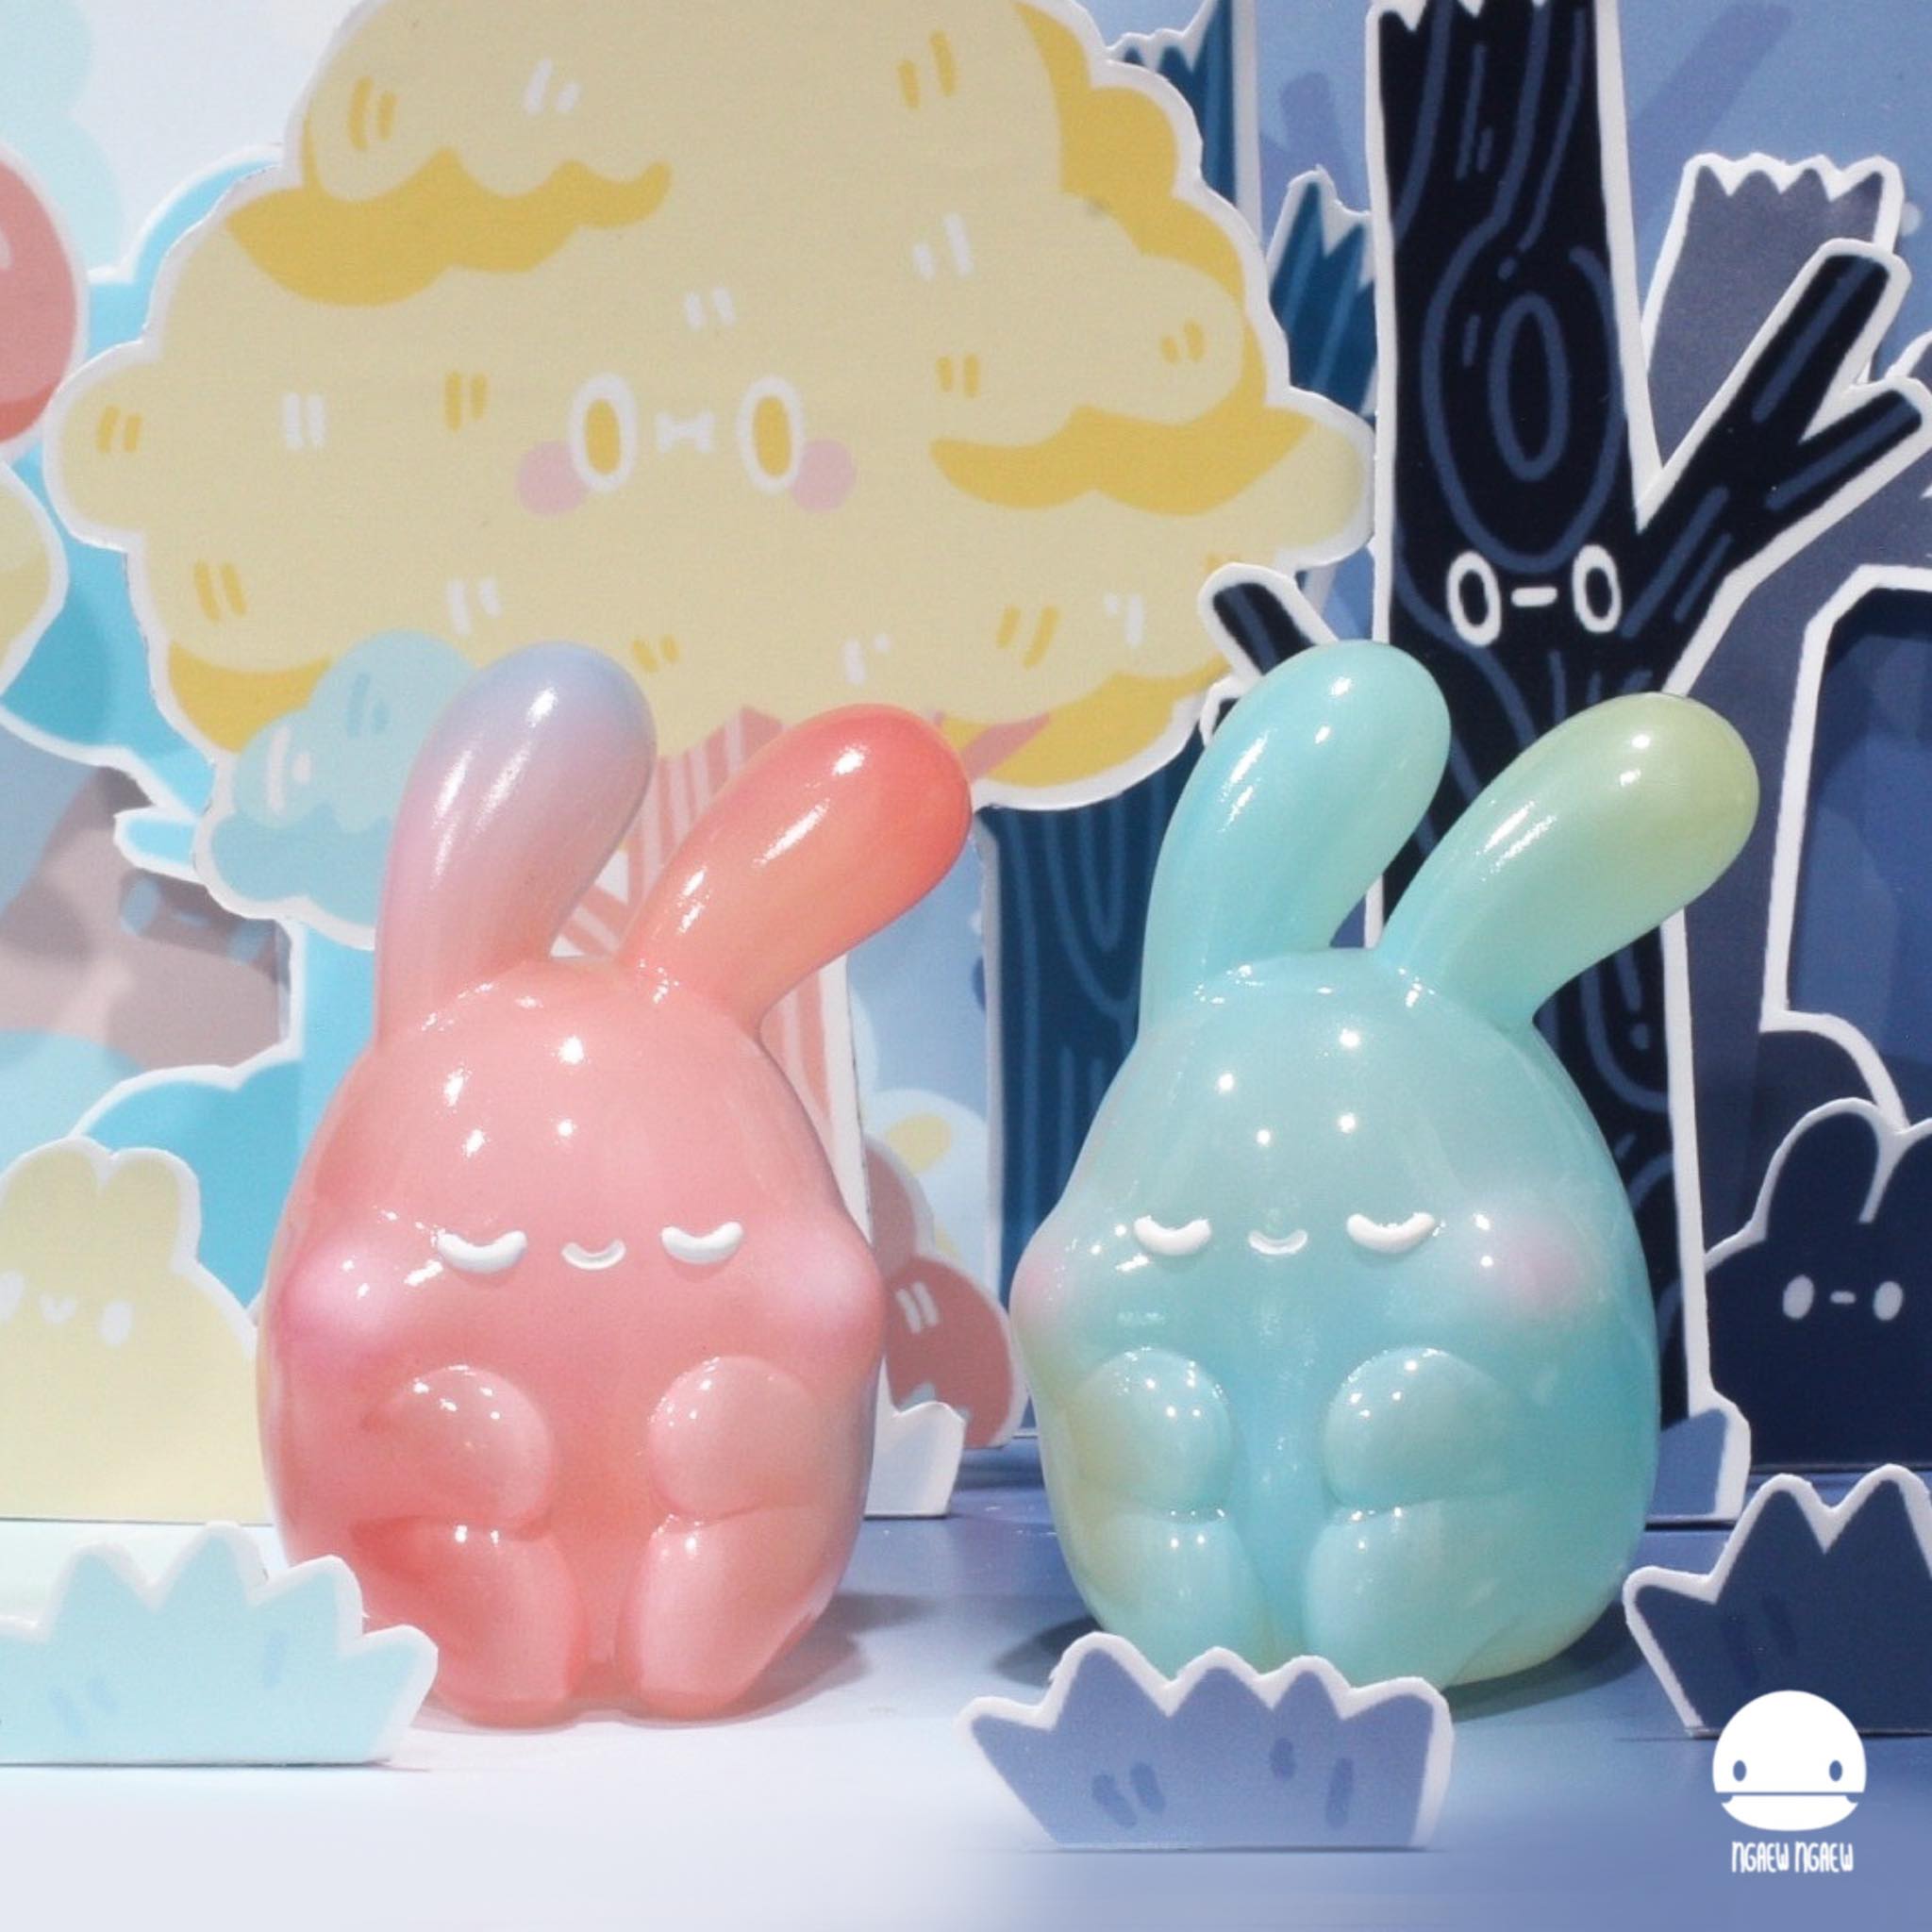 A blind box toy: Ngaew Ngaew Soul, a resin animal figure in blue and pink, 8cm in size. Preorder - Ships July 2024. Limited to one per person.